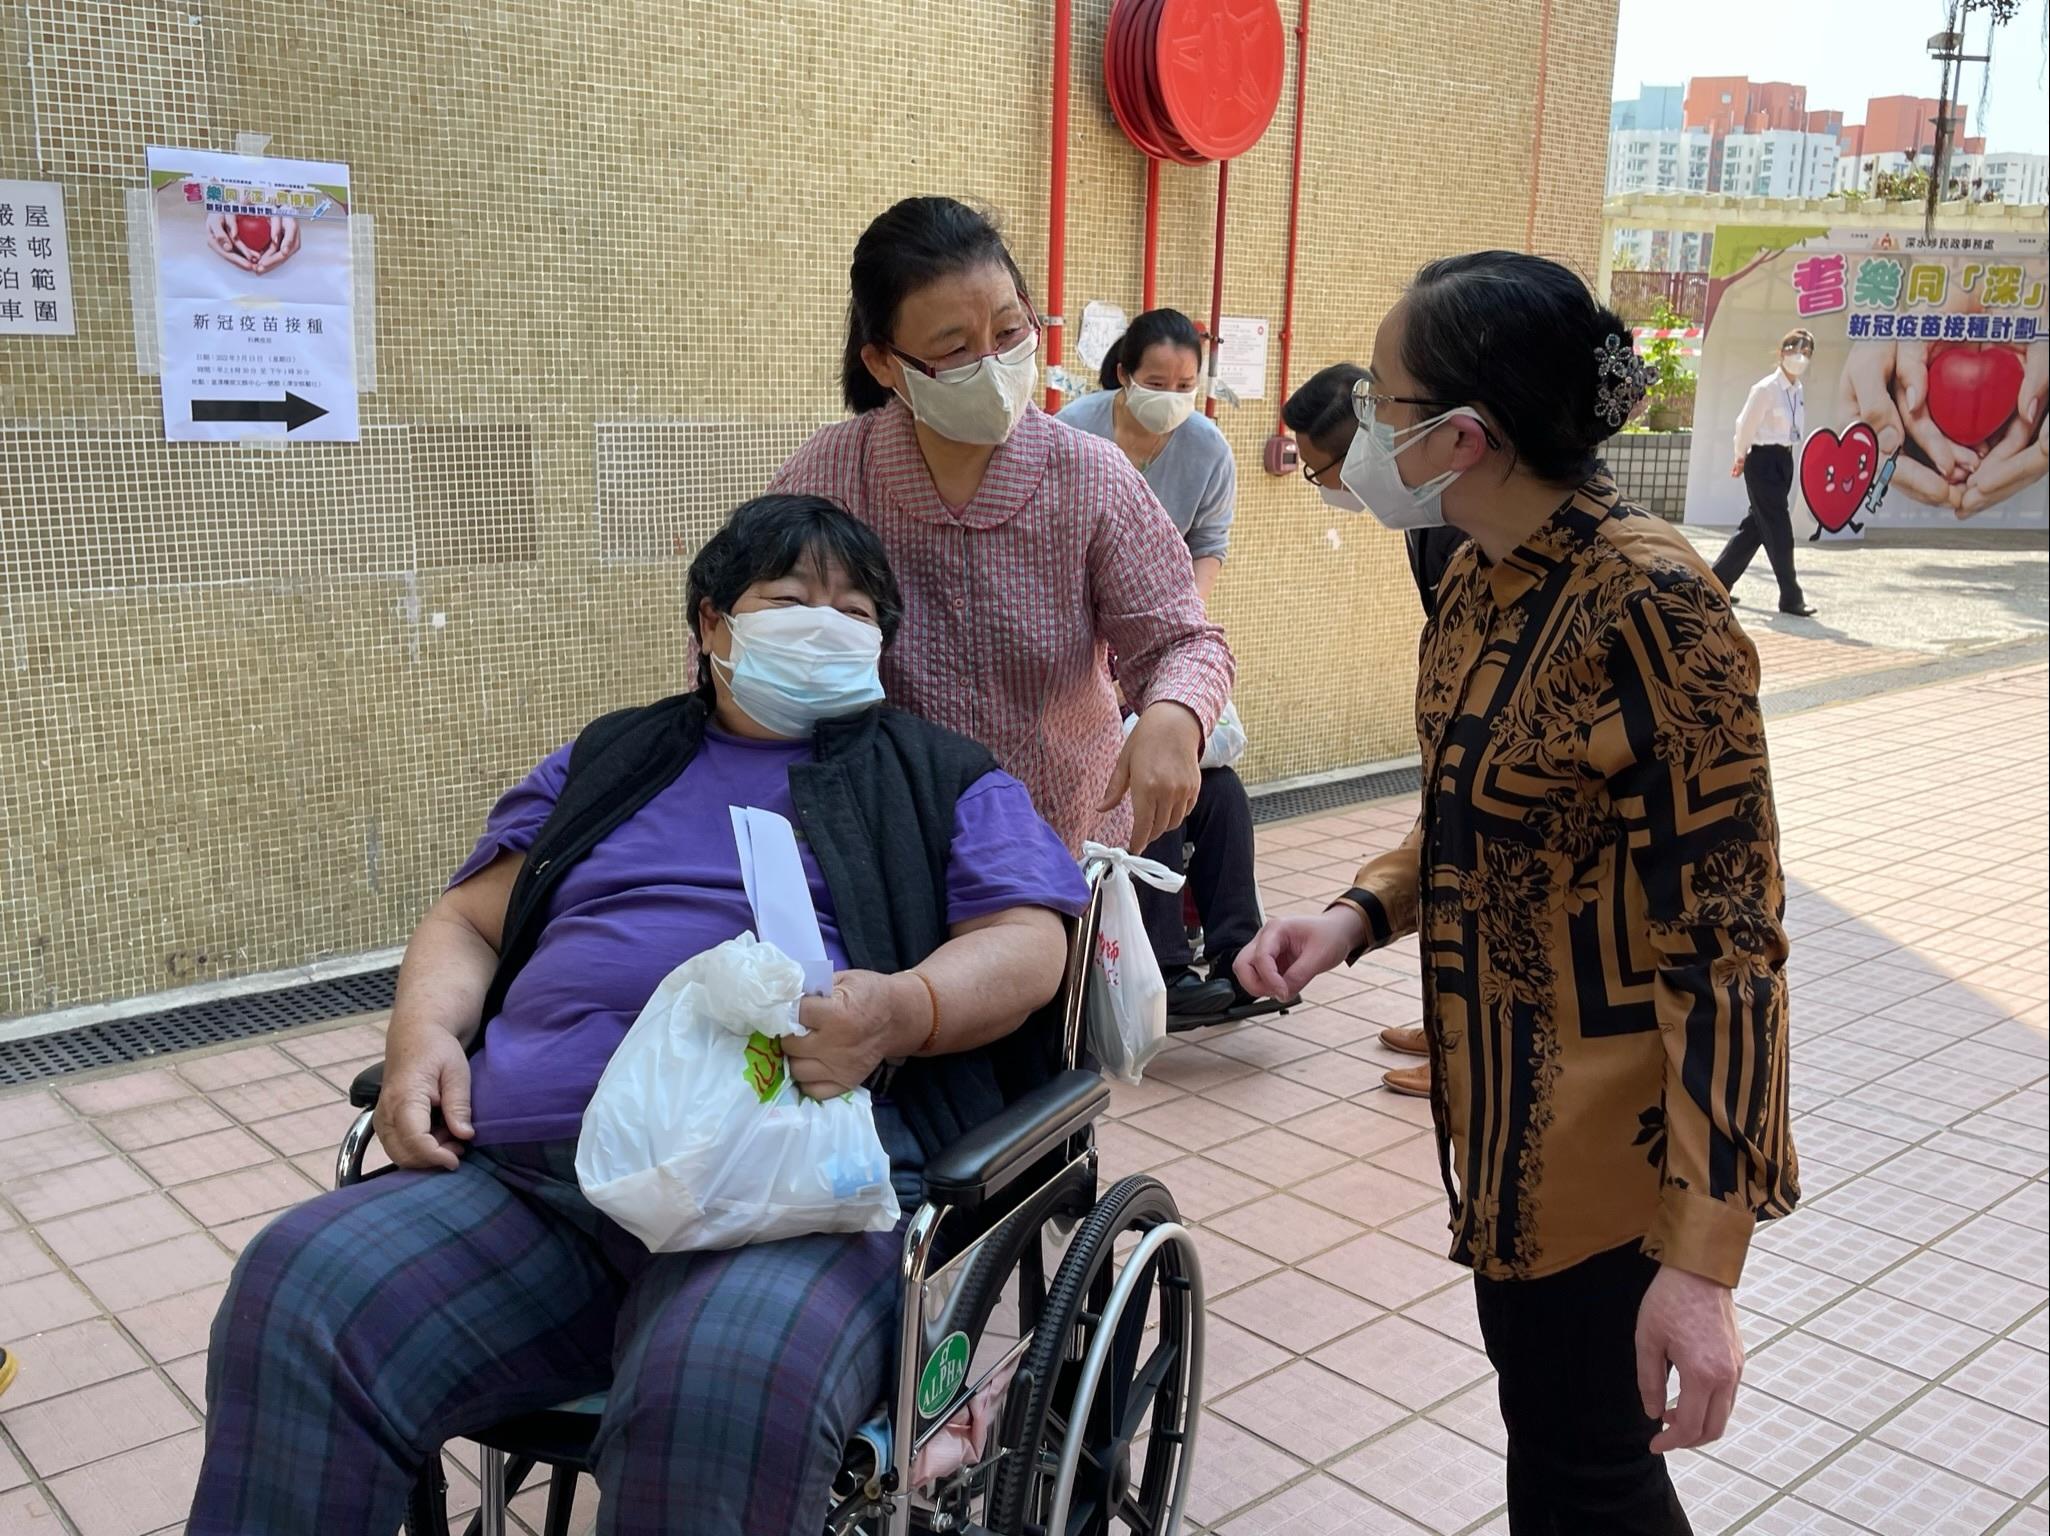 The Acting Director of Home Affairs, Miss Vega Wong, officiated at the launch ceremony of a community vaccination programme for the elderly named "Vaccination for the Elderly in SSP" organised by the Sham Shui Po District Office held in Chak On Estate today (March 13). Photo shows Miss Wong (right) chatting with residents at the Estate to learn more about the difficulties they encounter and the support they need under the epidemic.